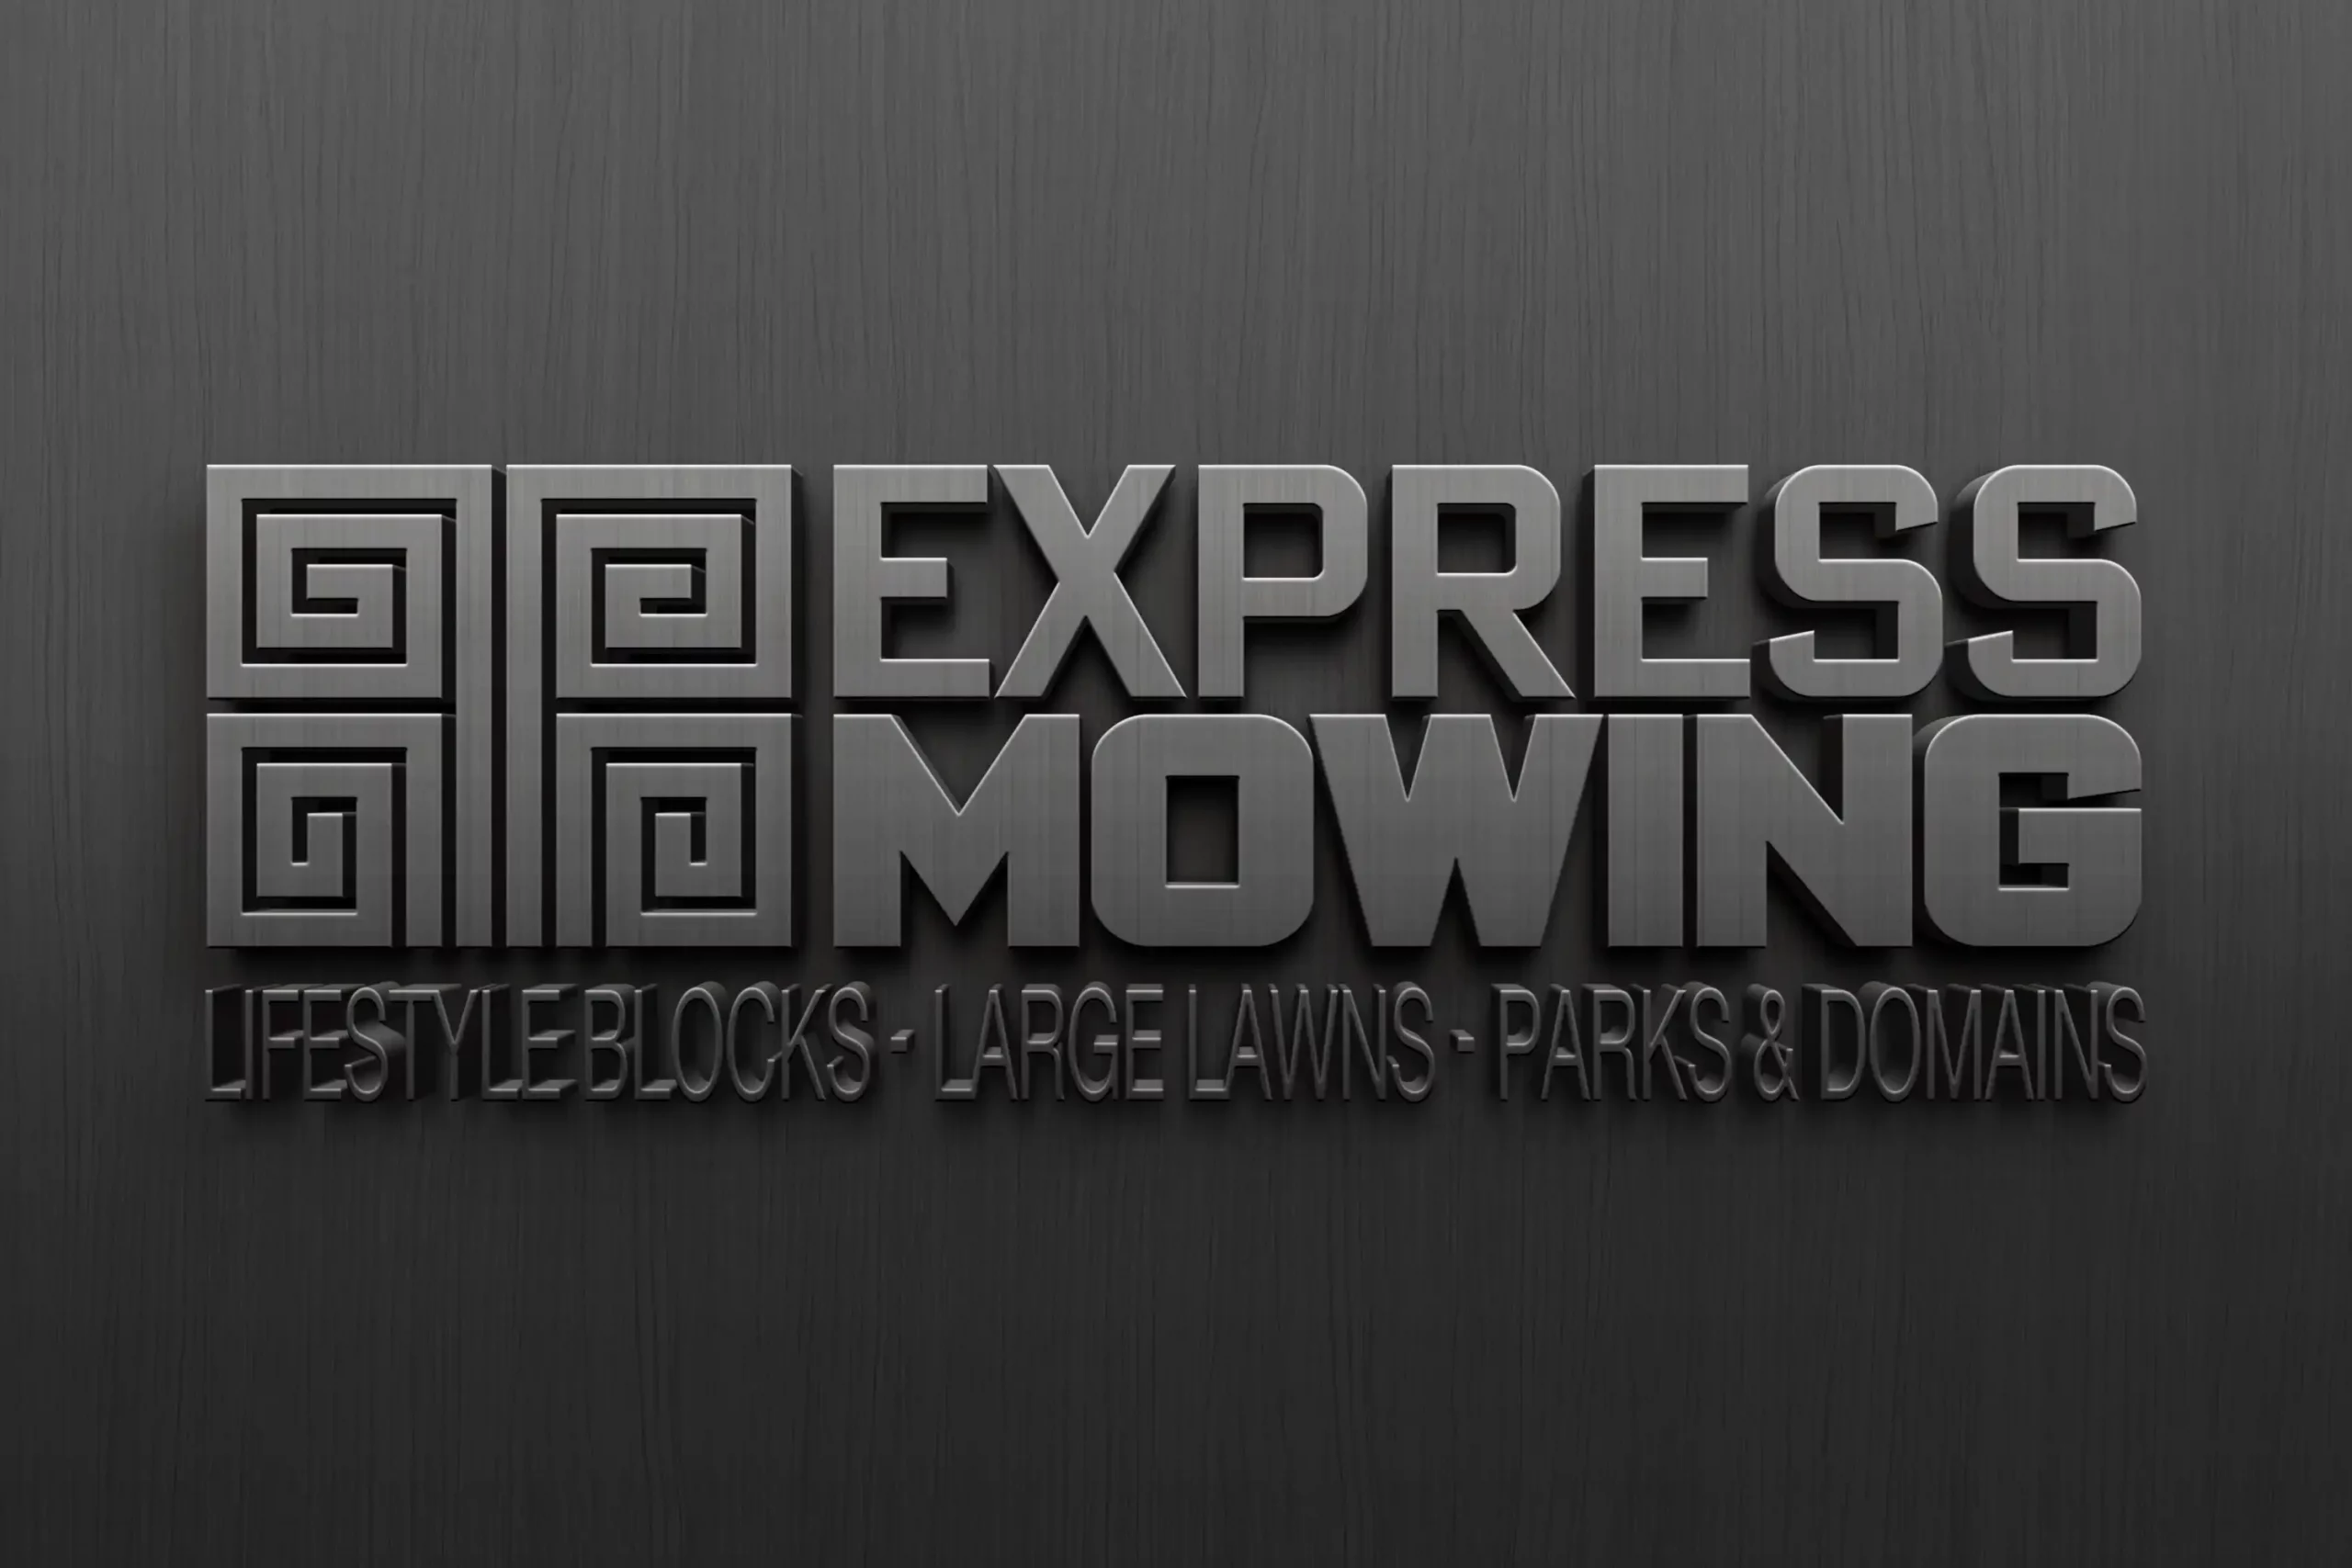 Logo Making made easy for Express Lawn Mowing in Rolleston, Selwyn, Christchurch, Canterbury, NZ. A formal, garden hedge styled Logo Design made by XDC.NZ, the super experienced, Logo Designer based in Christchurch & Rolleston